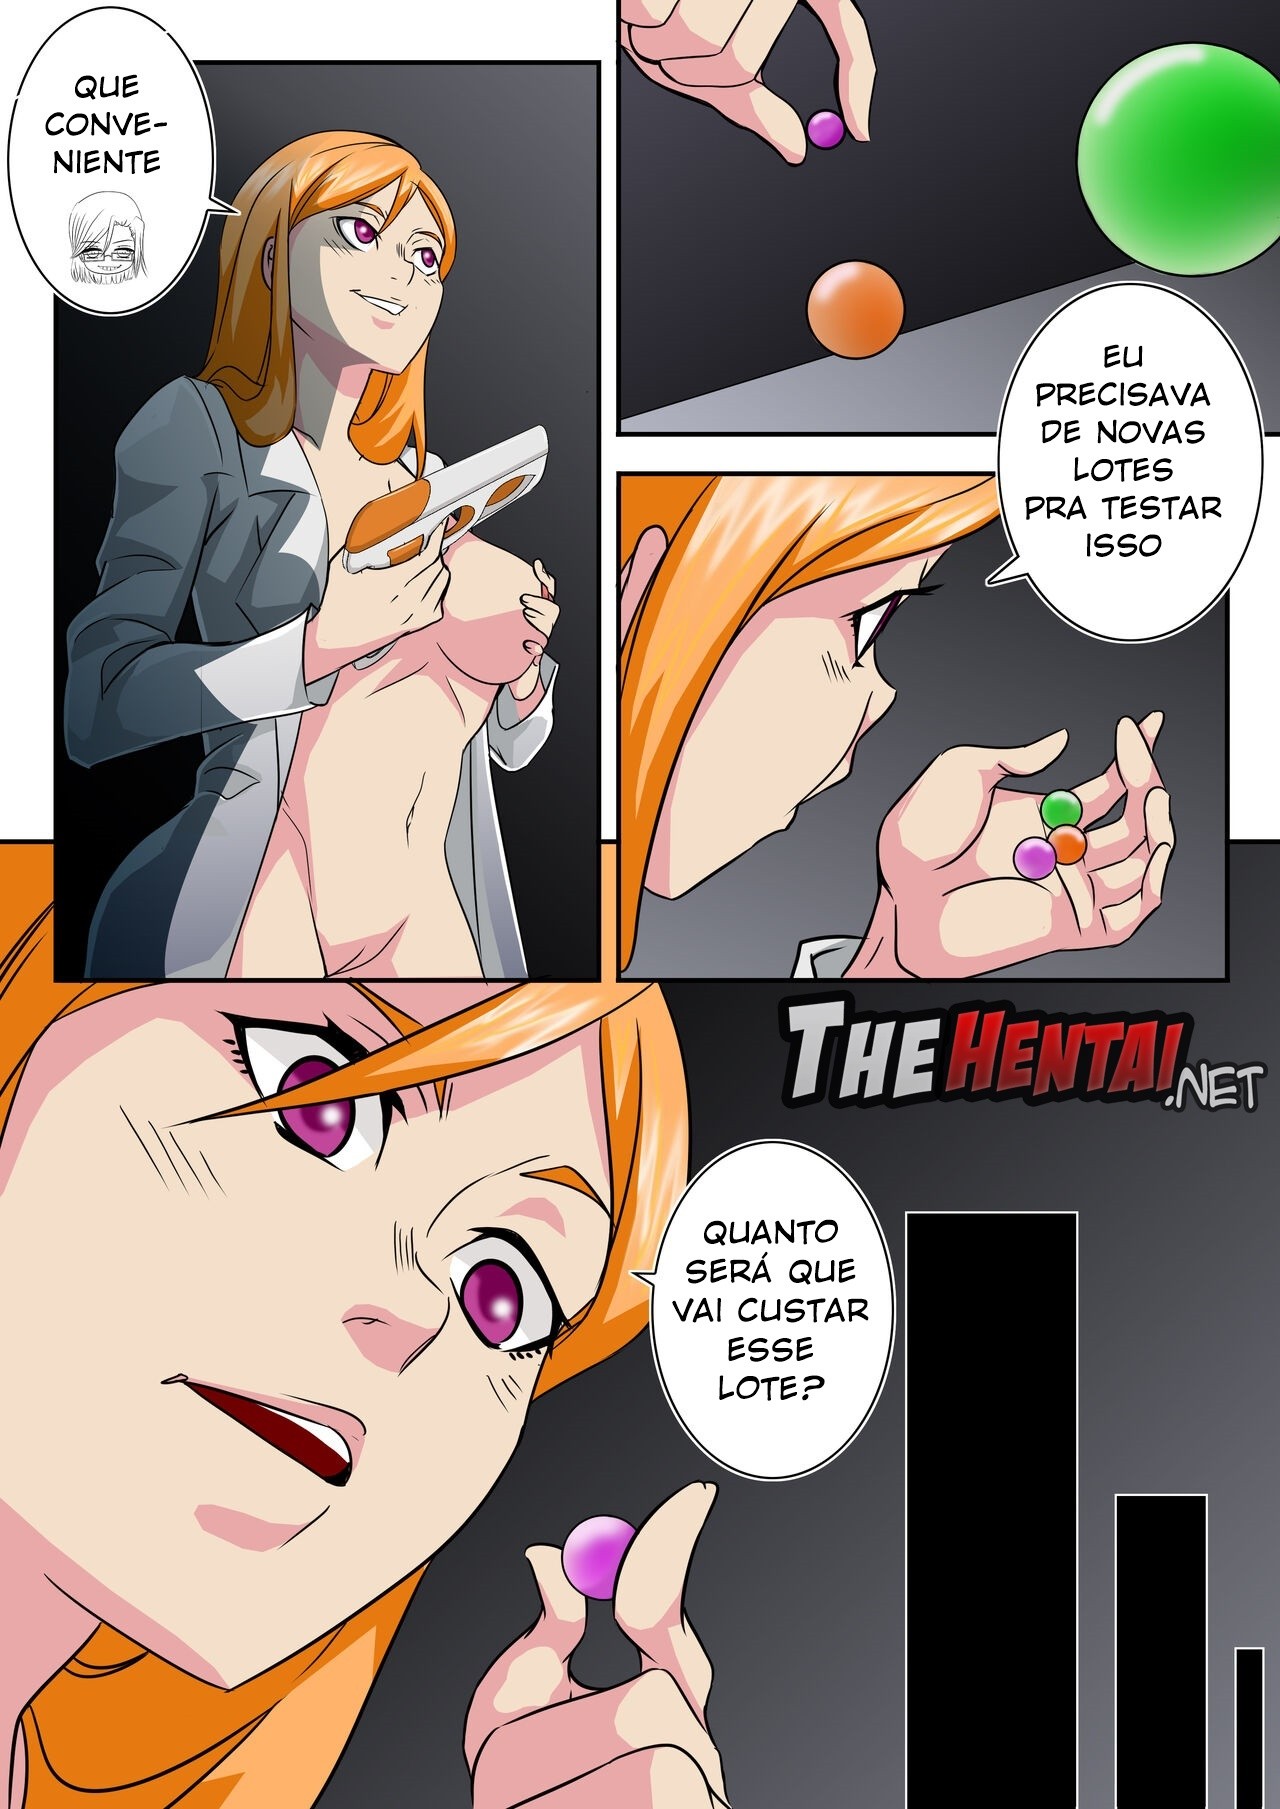 Bleach: A What If Story Part 5 Hentai pt-br 57